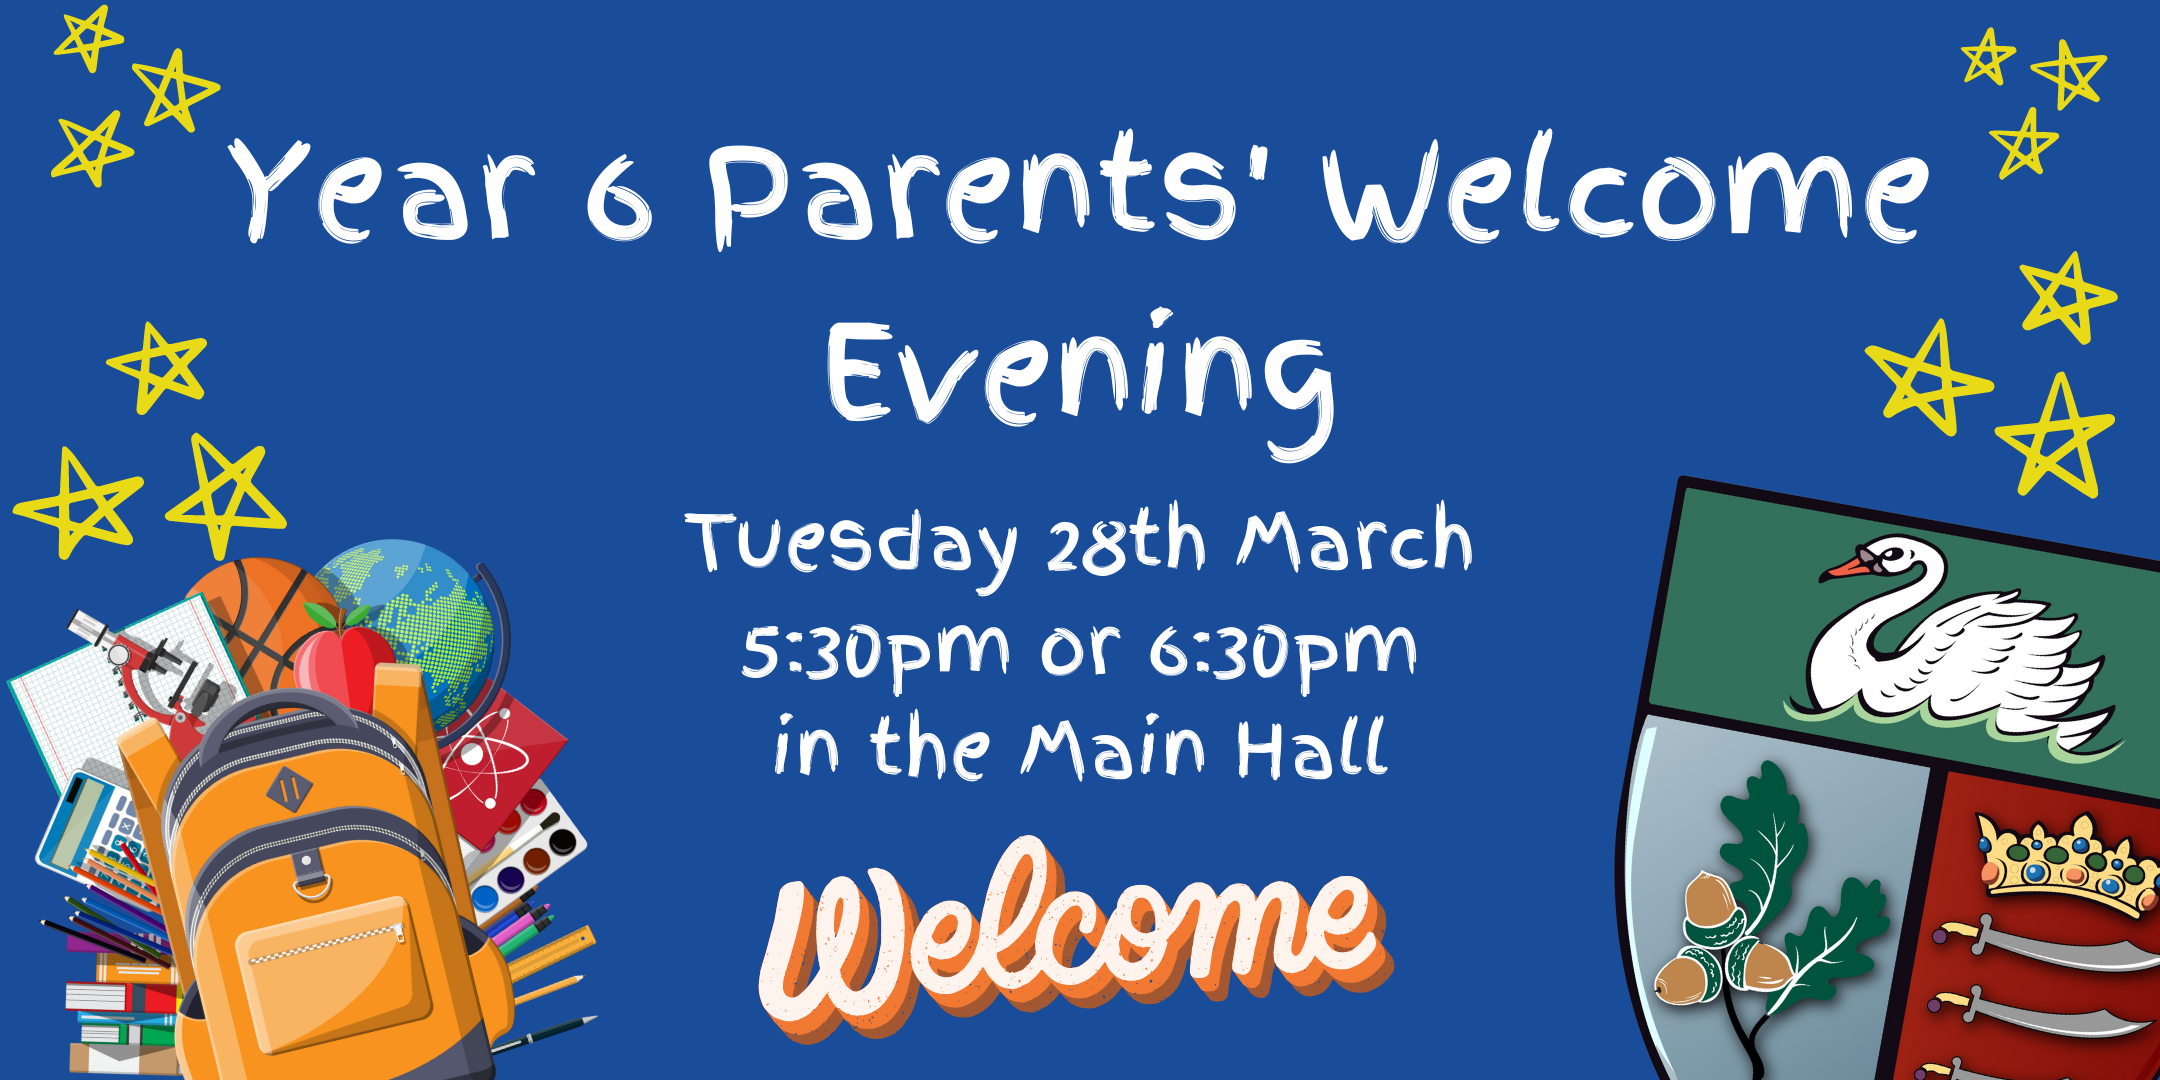 Year 6 Parents' Welcome Evening (1)